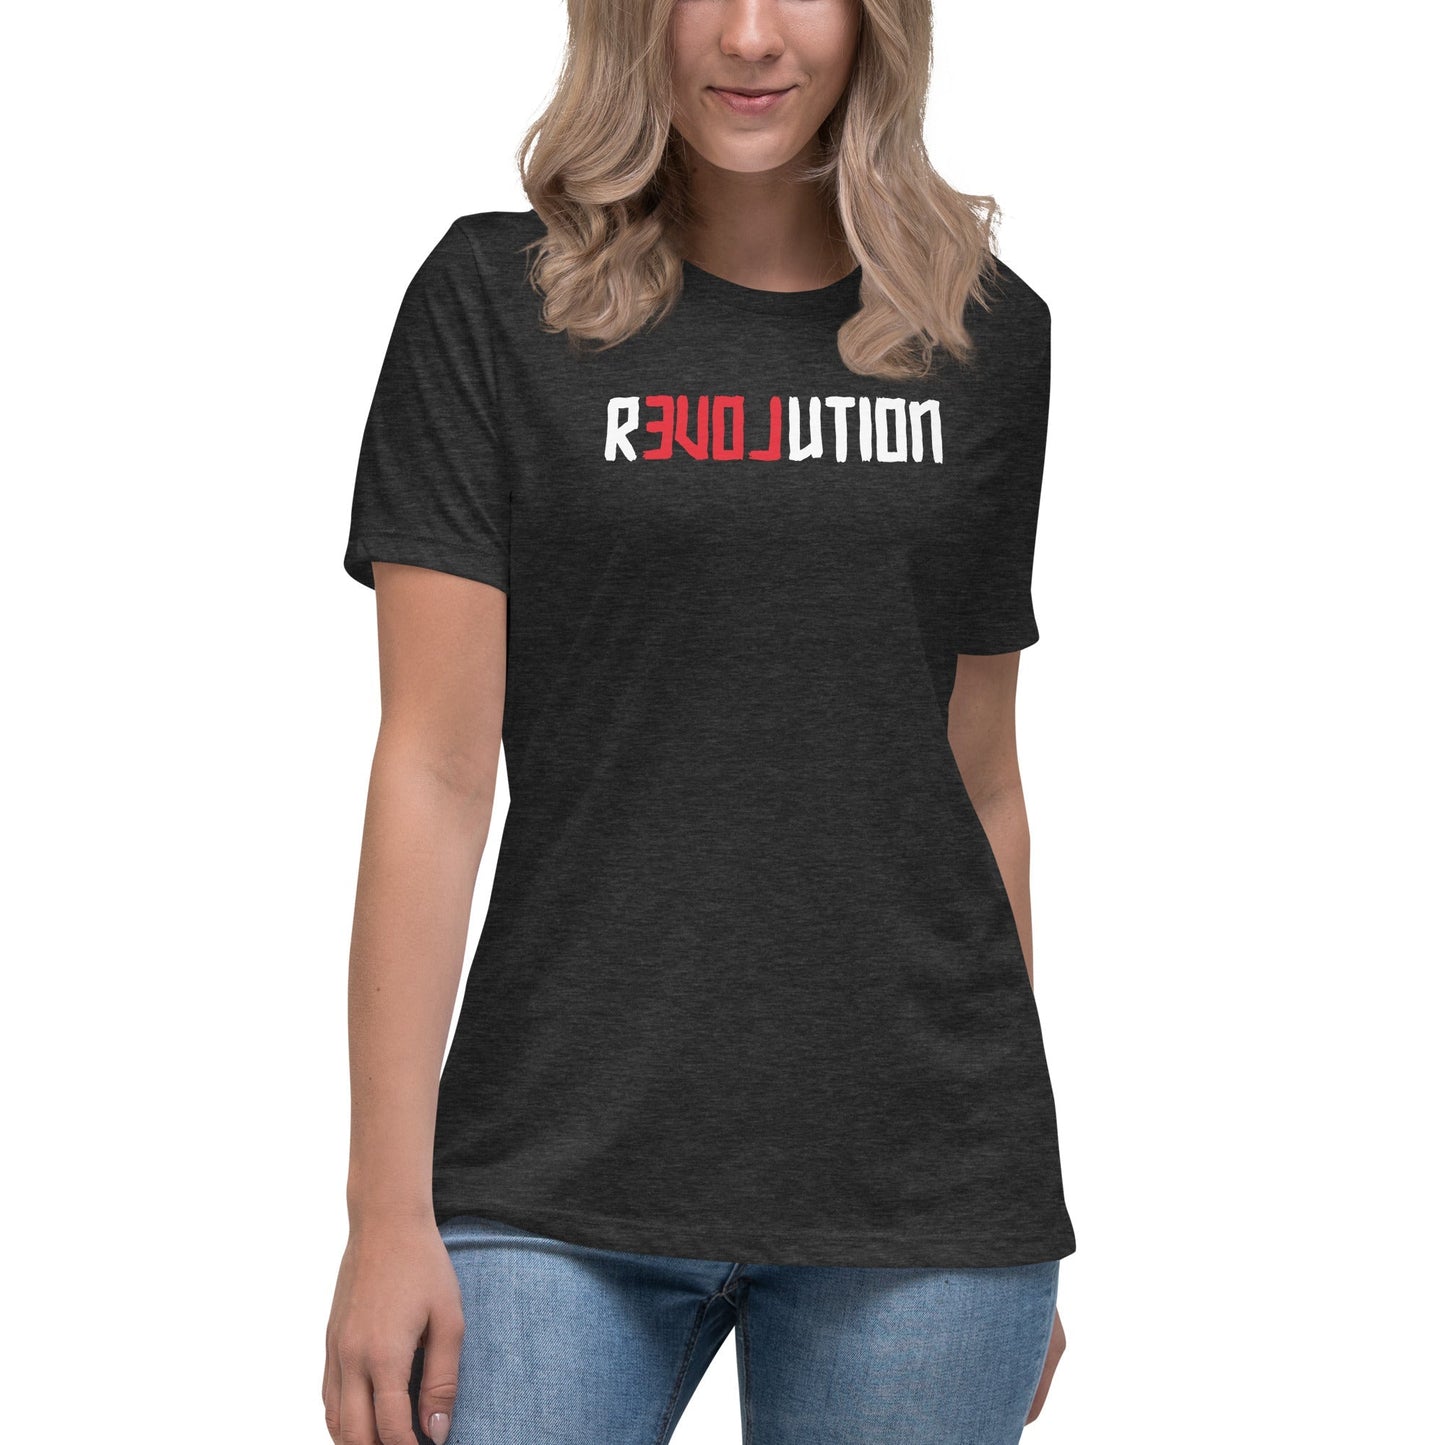 There is Love in Revolution - Women's T-Shirt